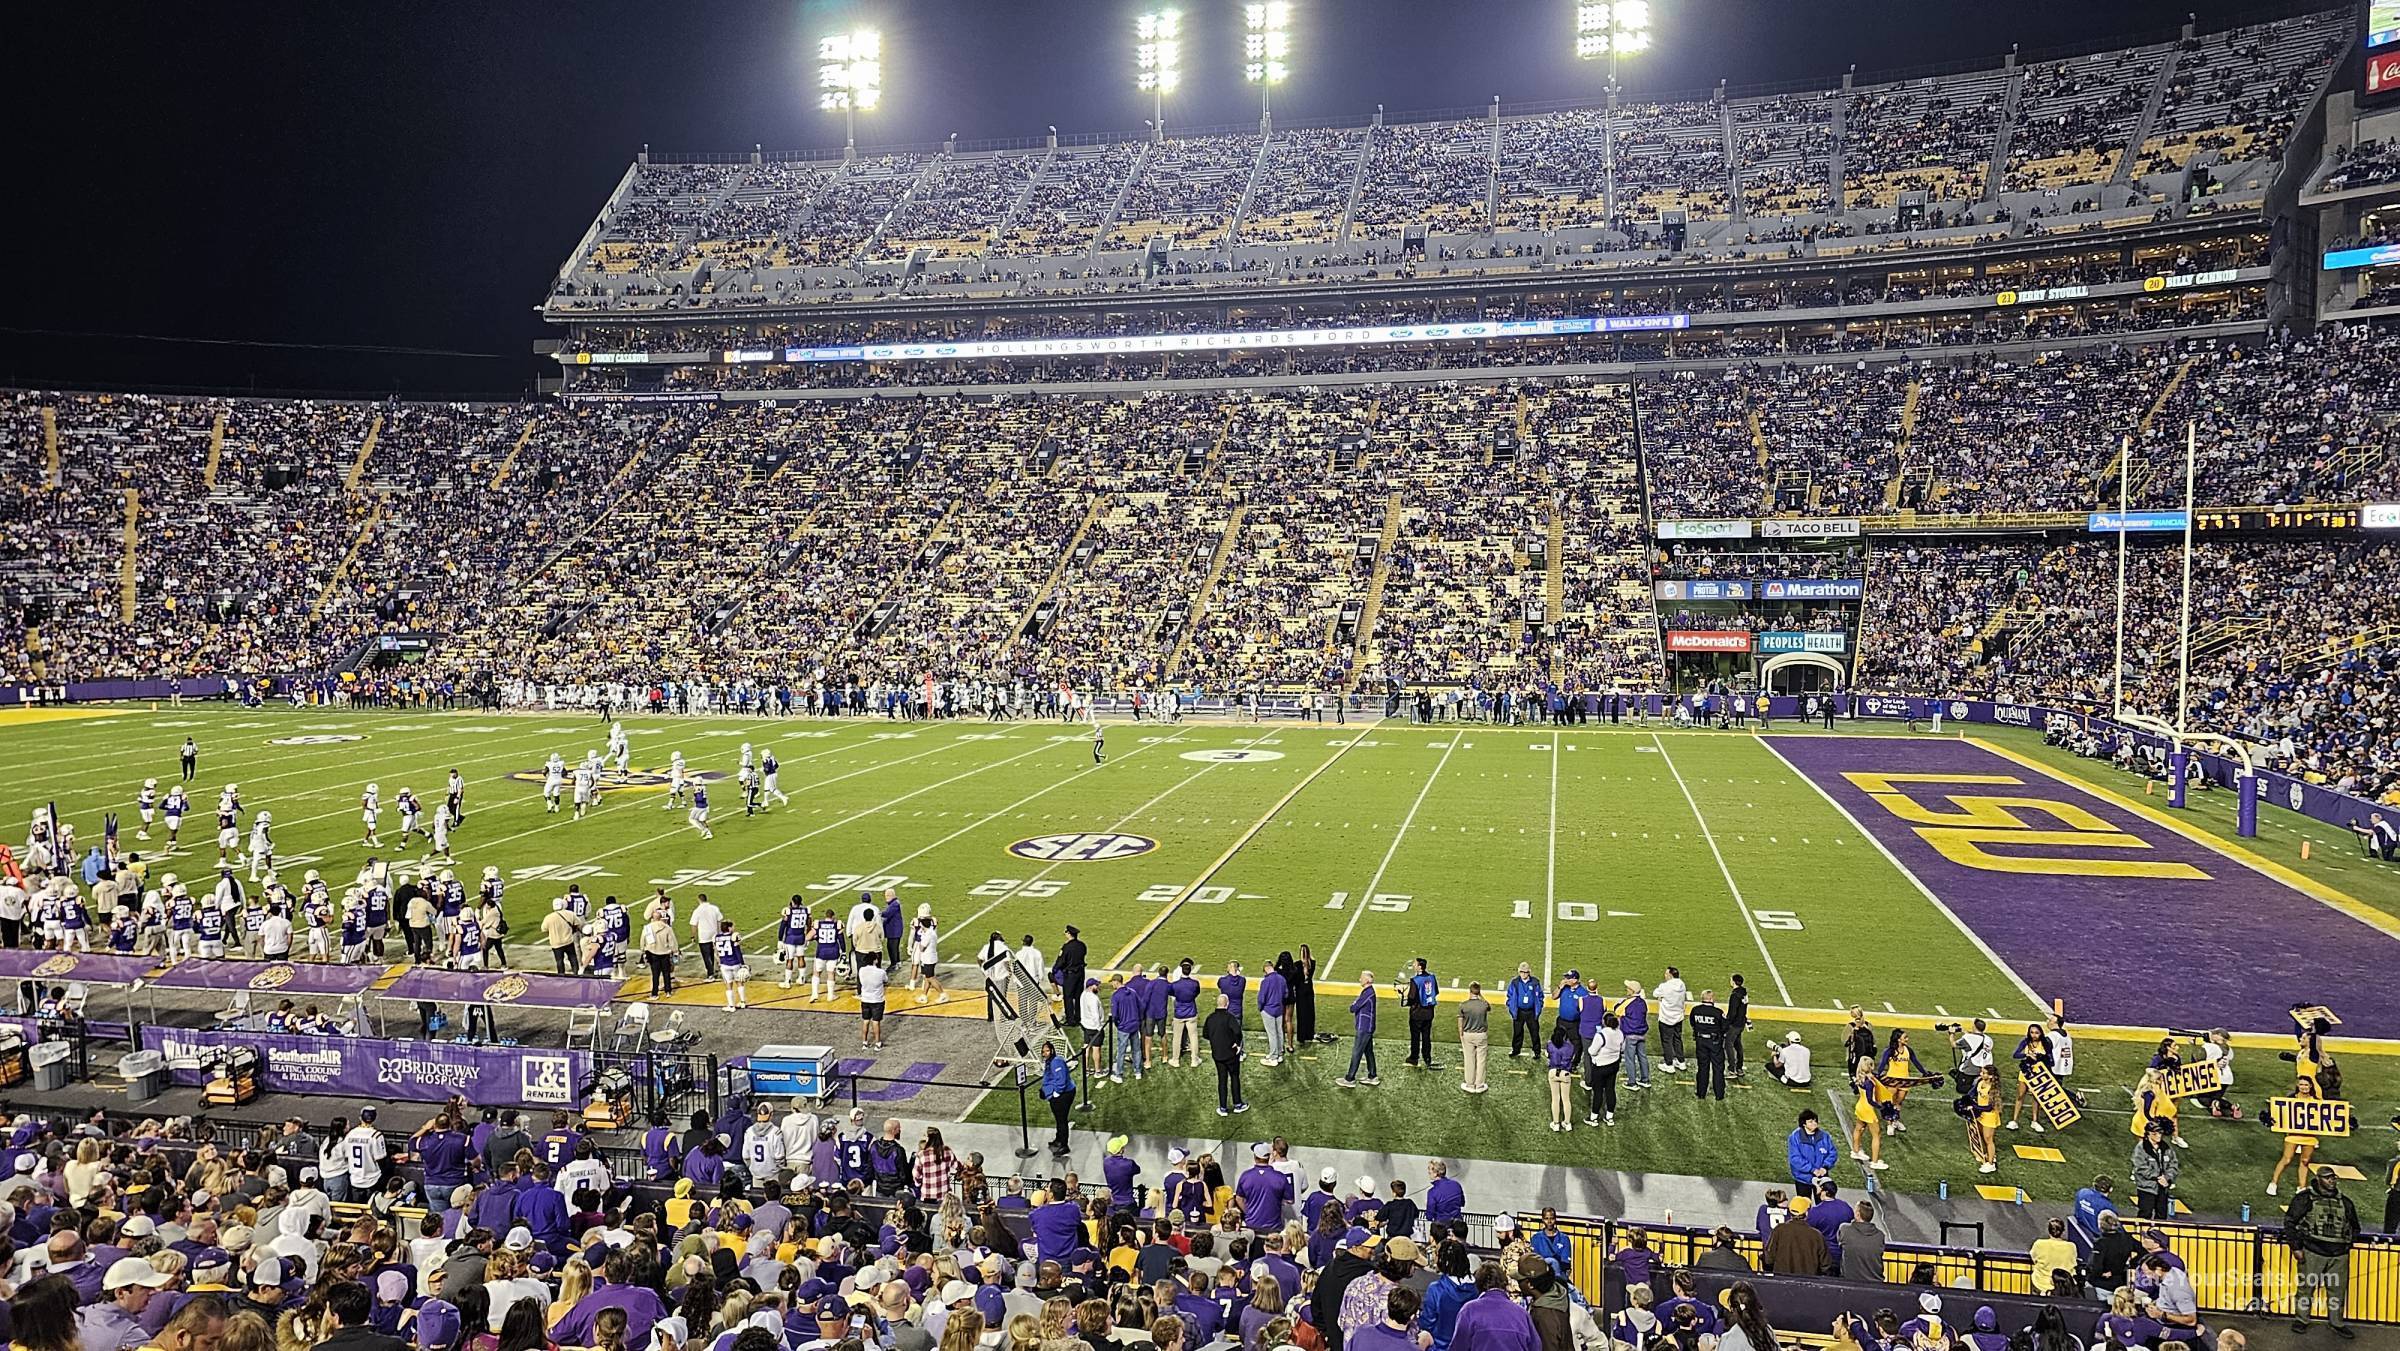 section 100, row 26 seat view  - tiger stadium